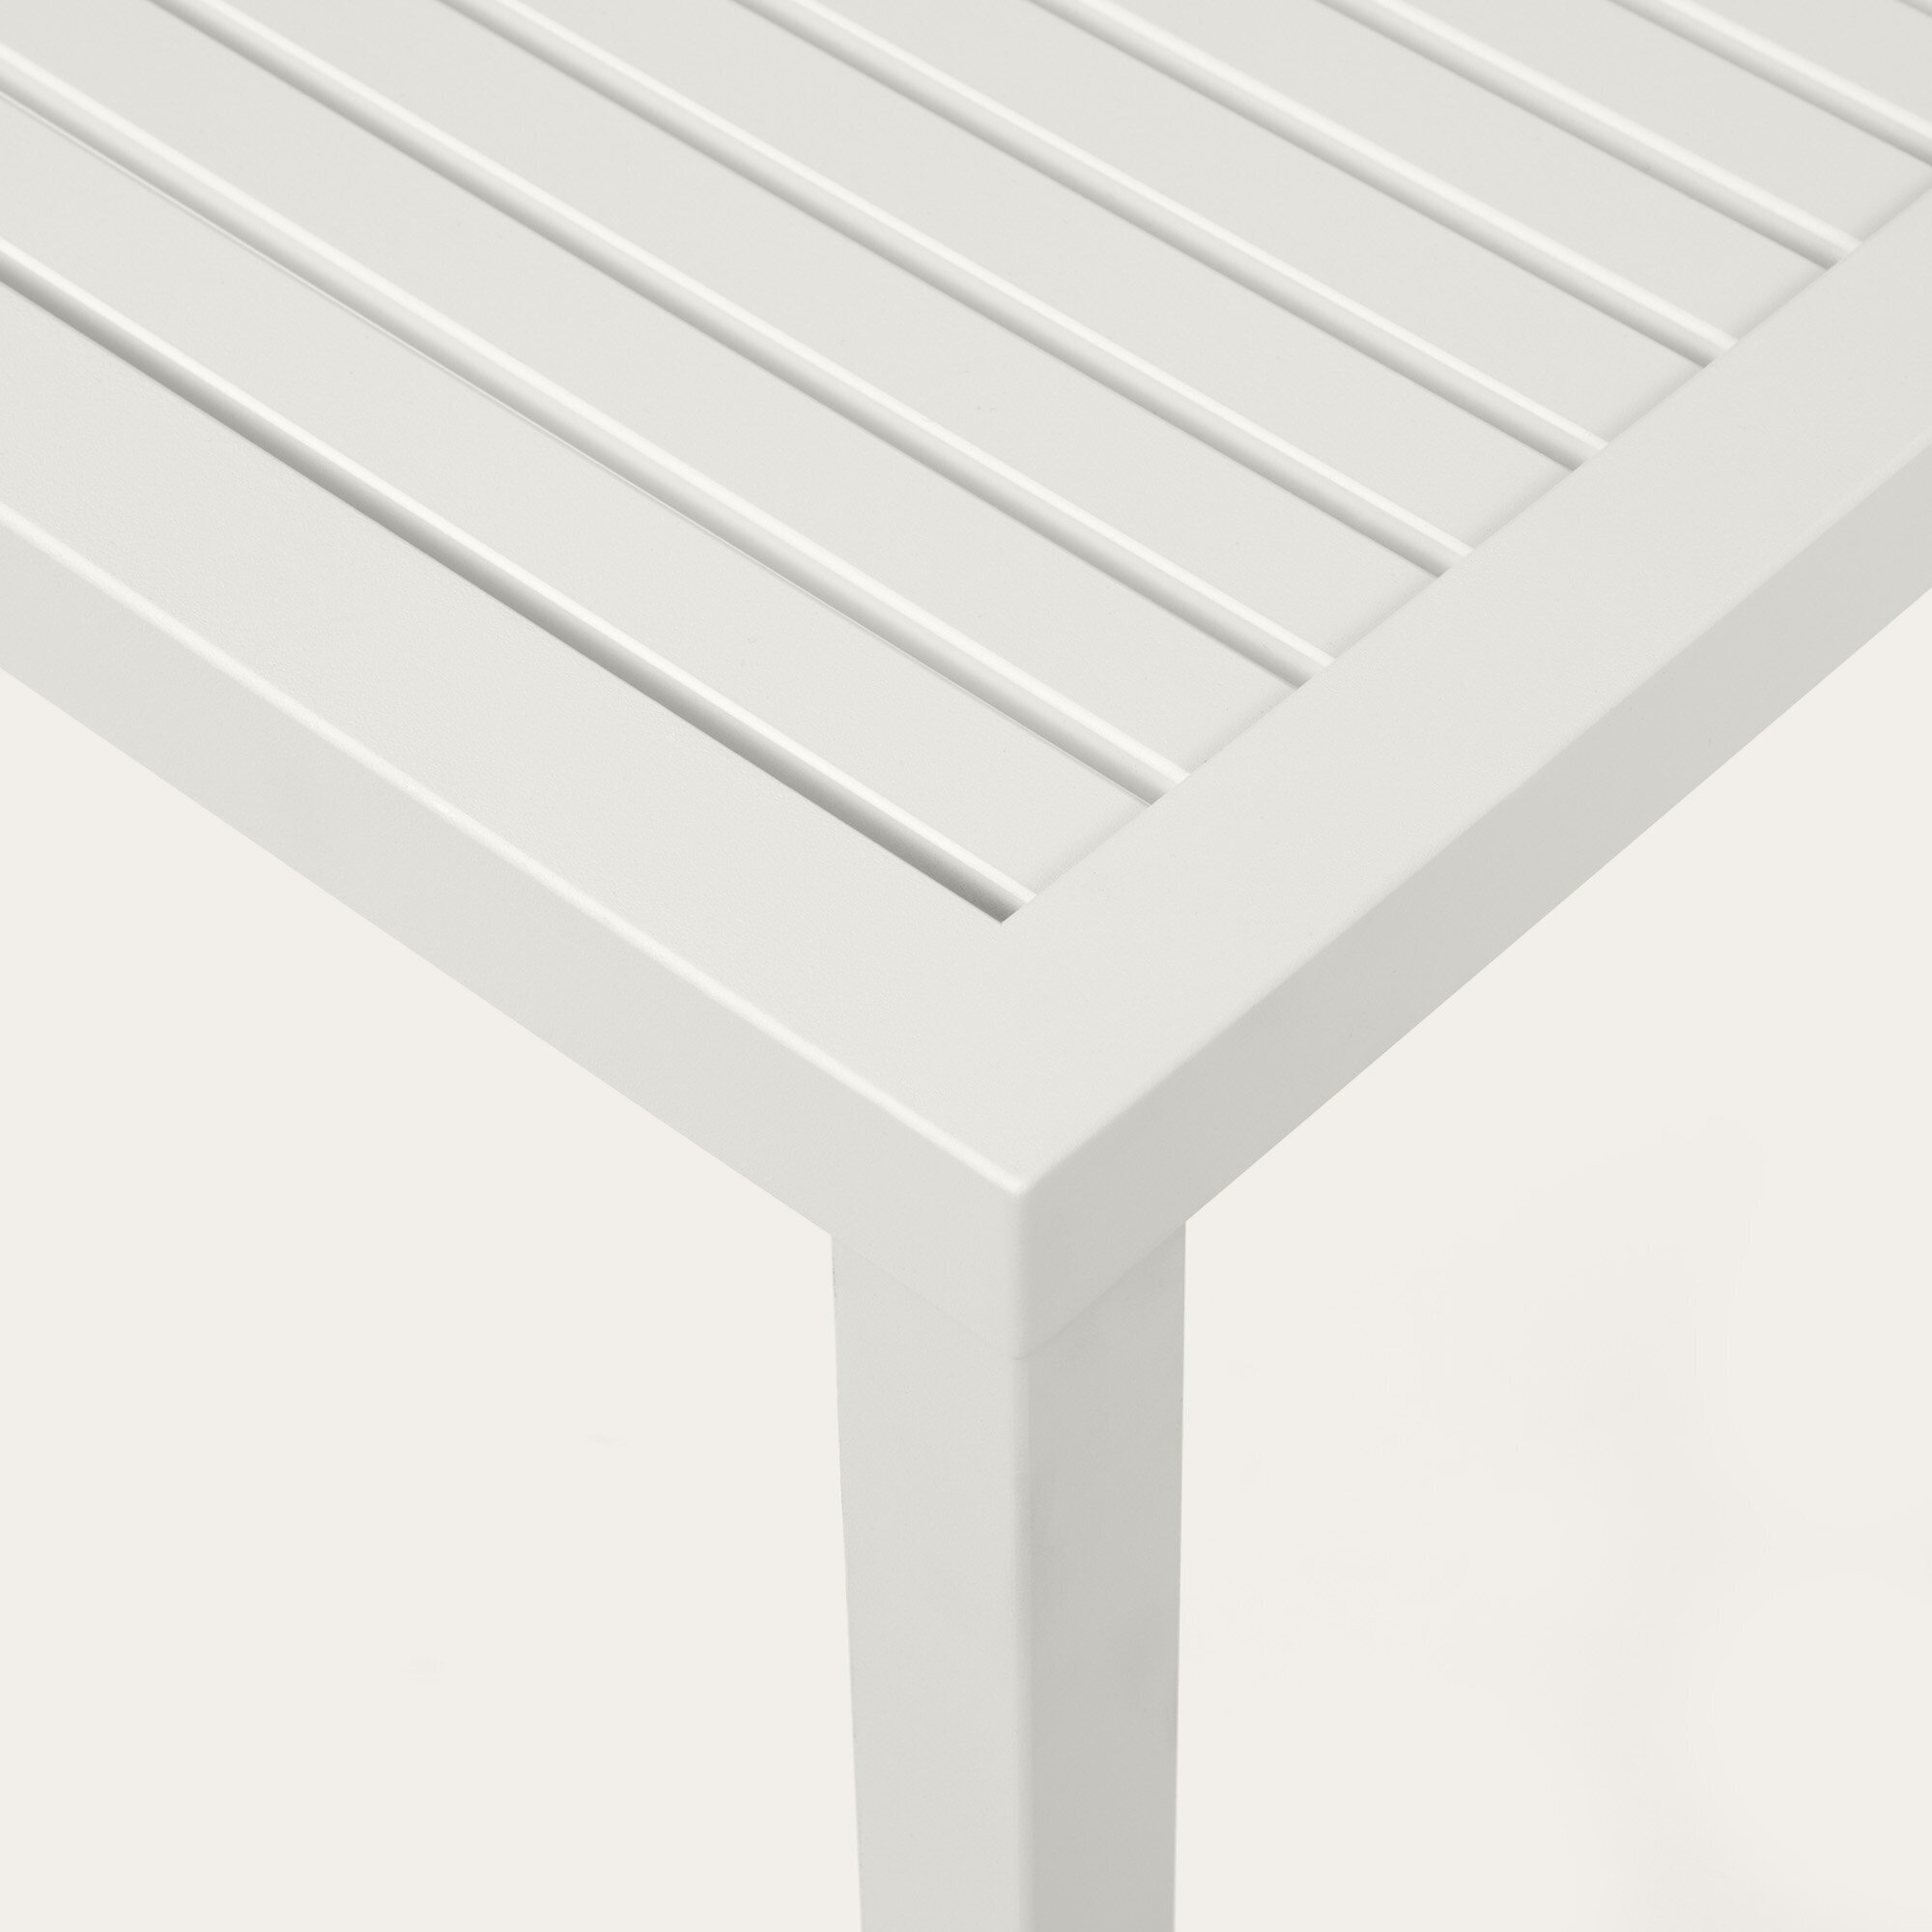 Square outdoor Design dining table | Trace Outdoor Table  White powdercoating KTL | White Powdercoat KTL | Studio HENK| 